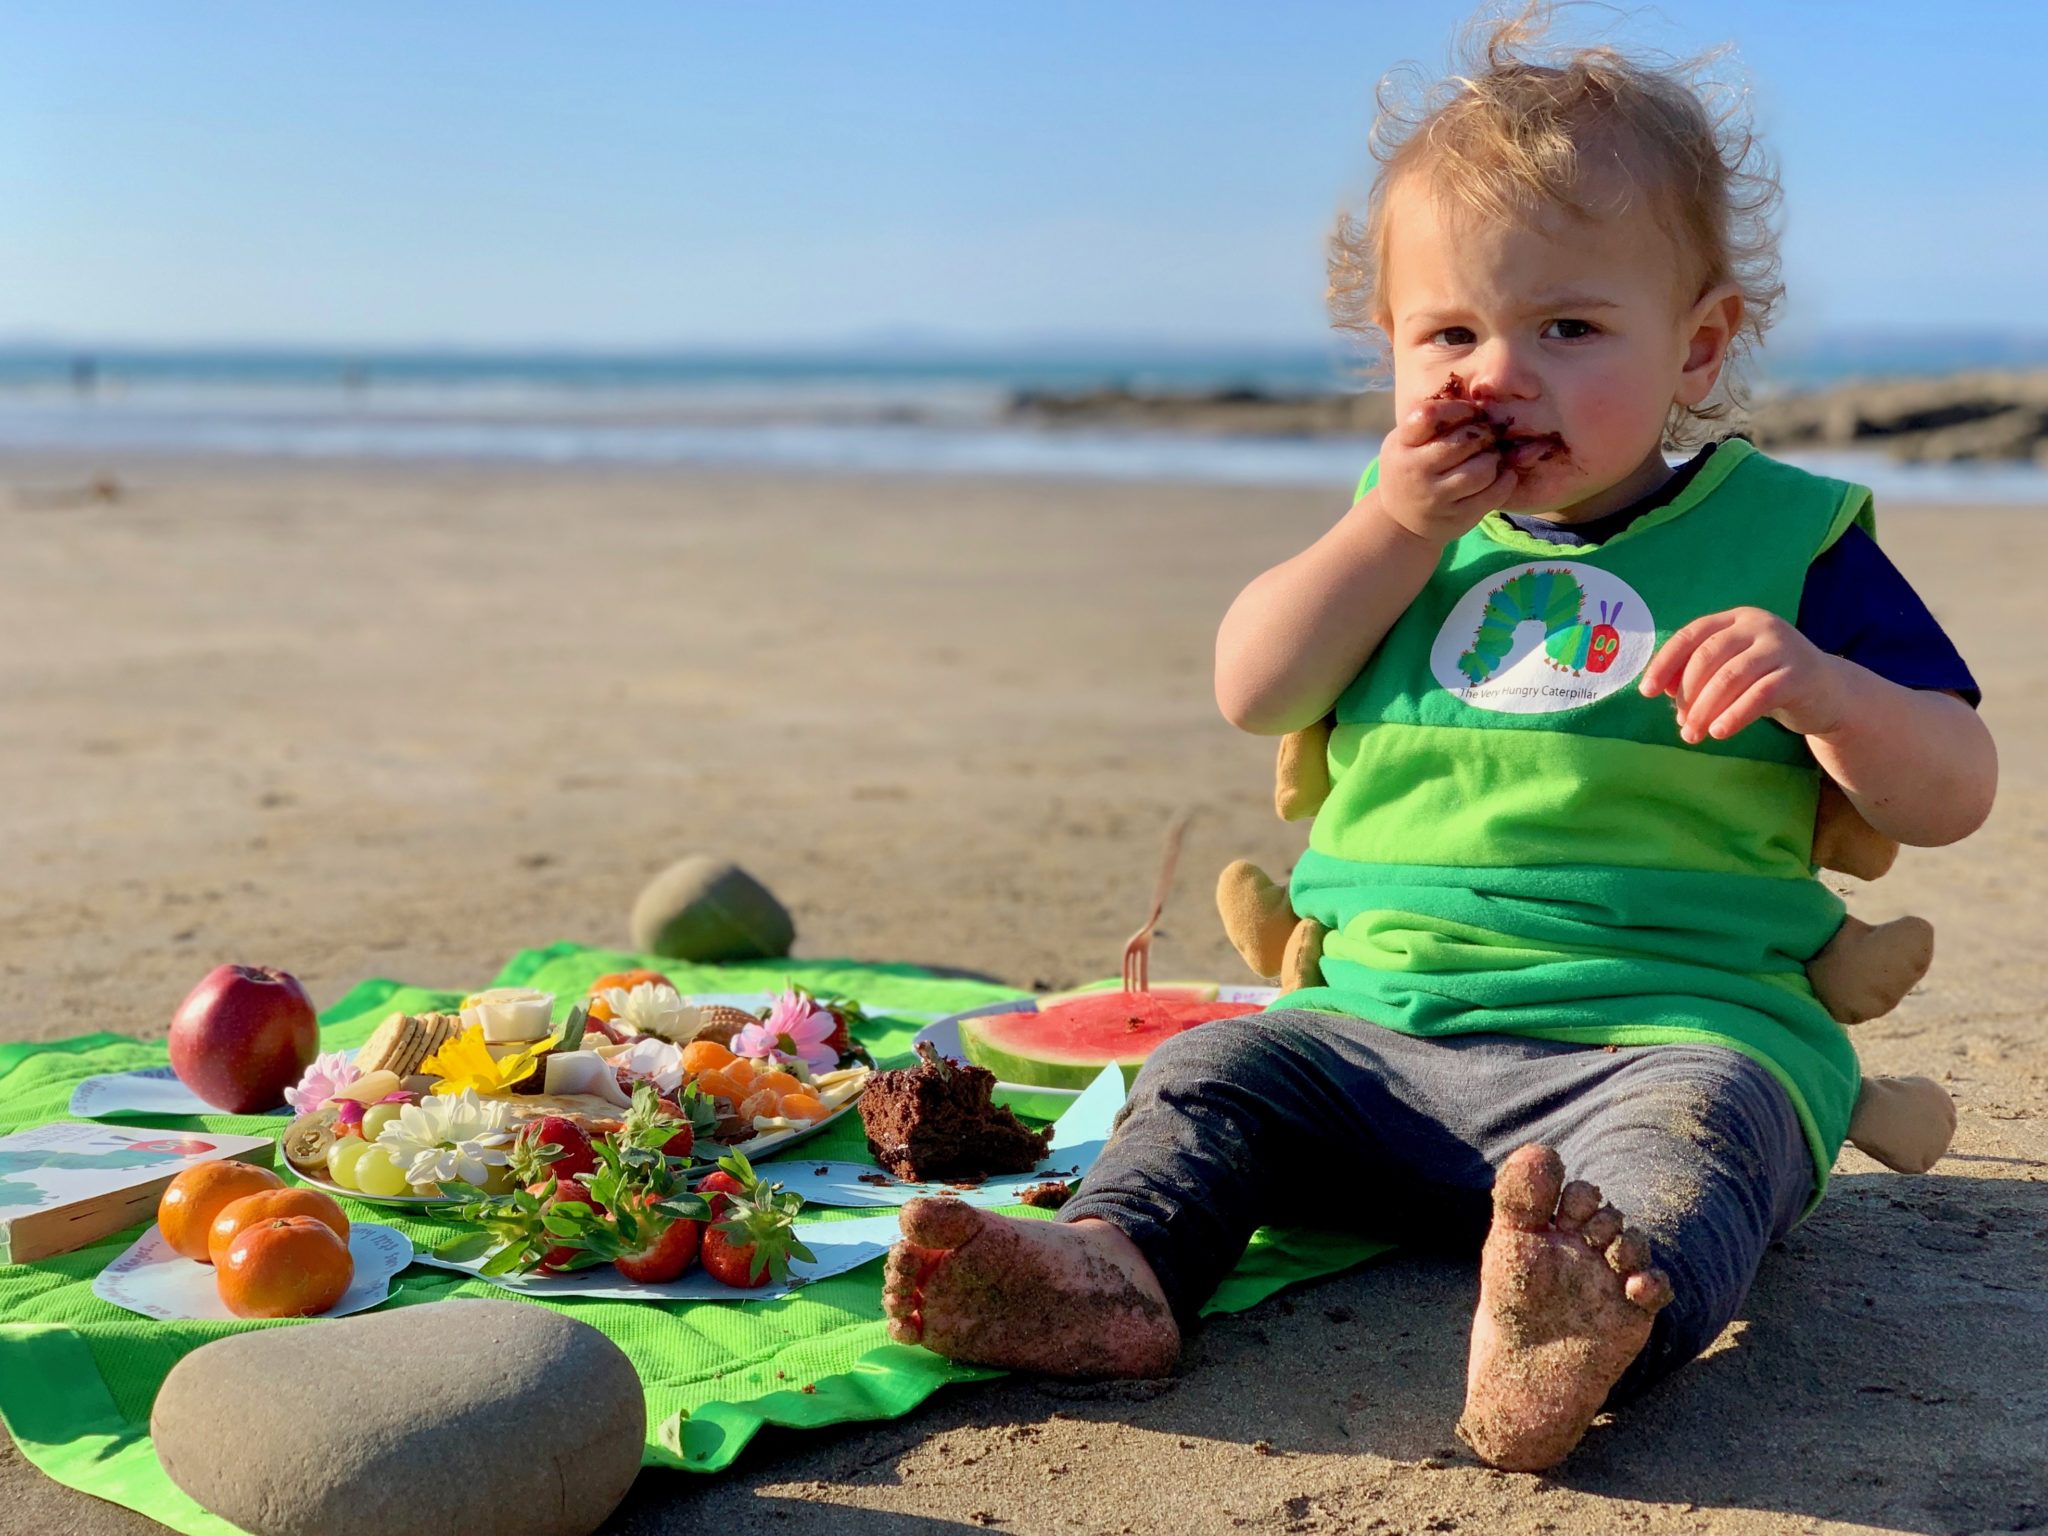 The Very Hungry Caterpillar Picnic